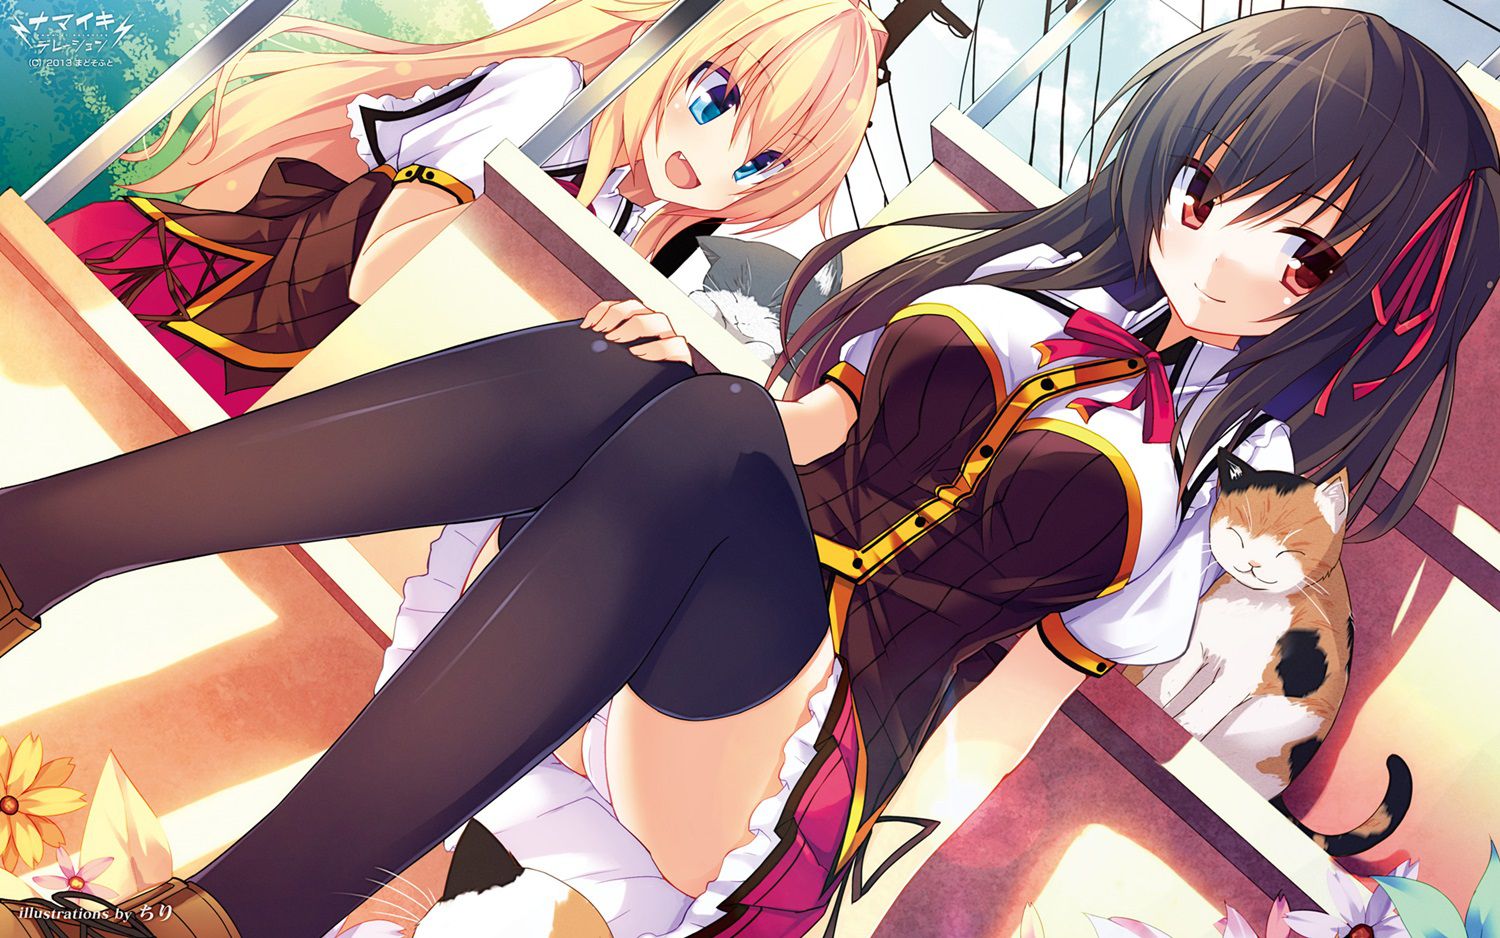 Namickideration [under age 18 prohibited eroge CG] wallpapers, images 7